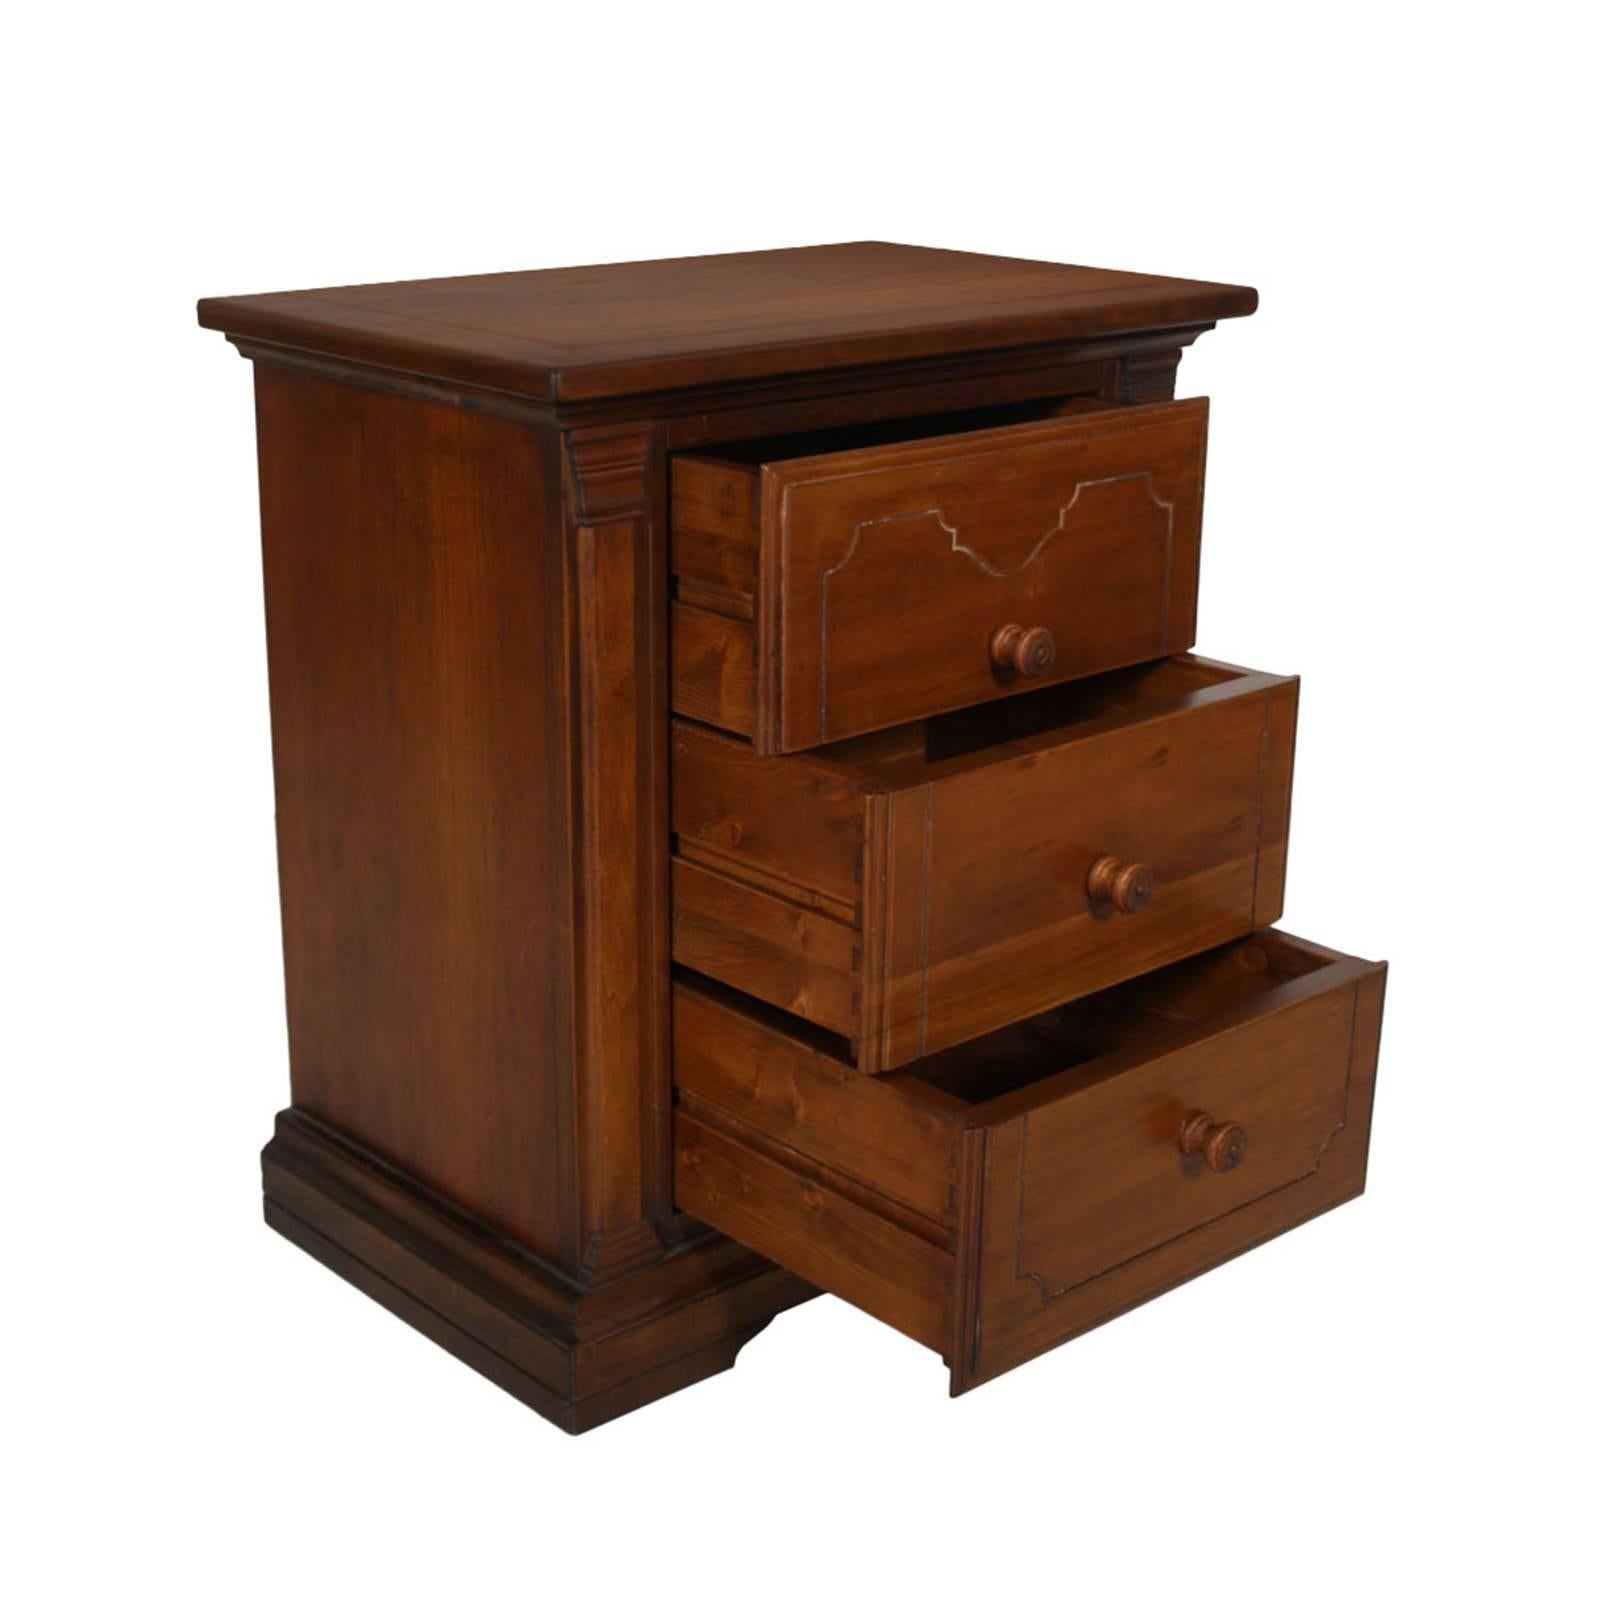 Early 20th century neoclassic small chest of drawers, cabinet, nightstand with drawers decorated in relief in massive walnut,  polished to wax

Measure cm: H 62 x W 57 x D 37.